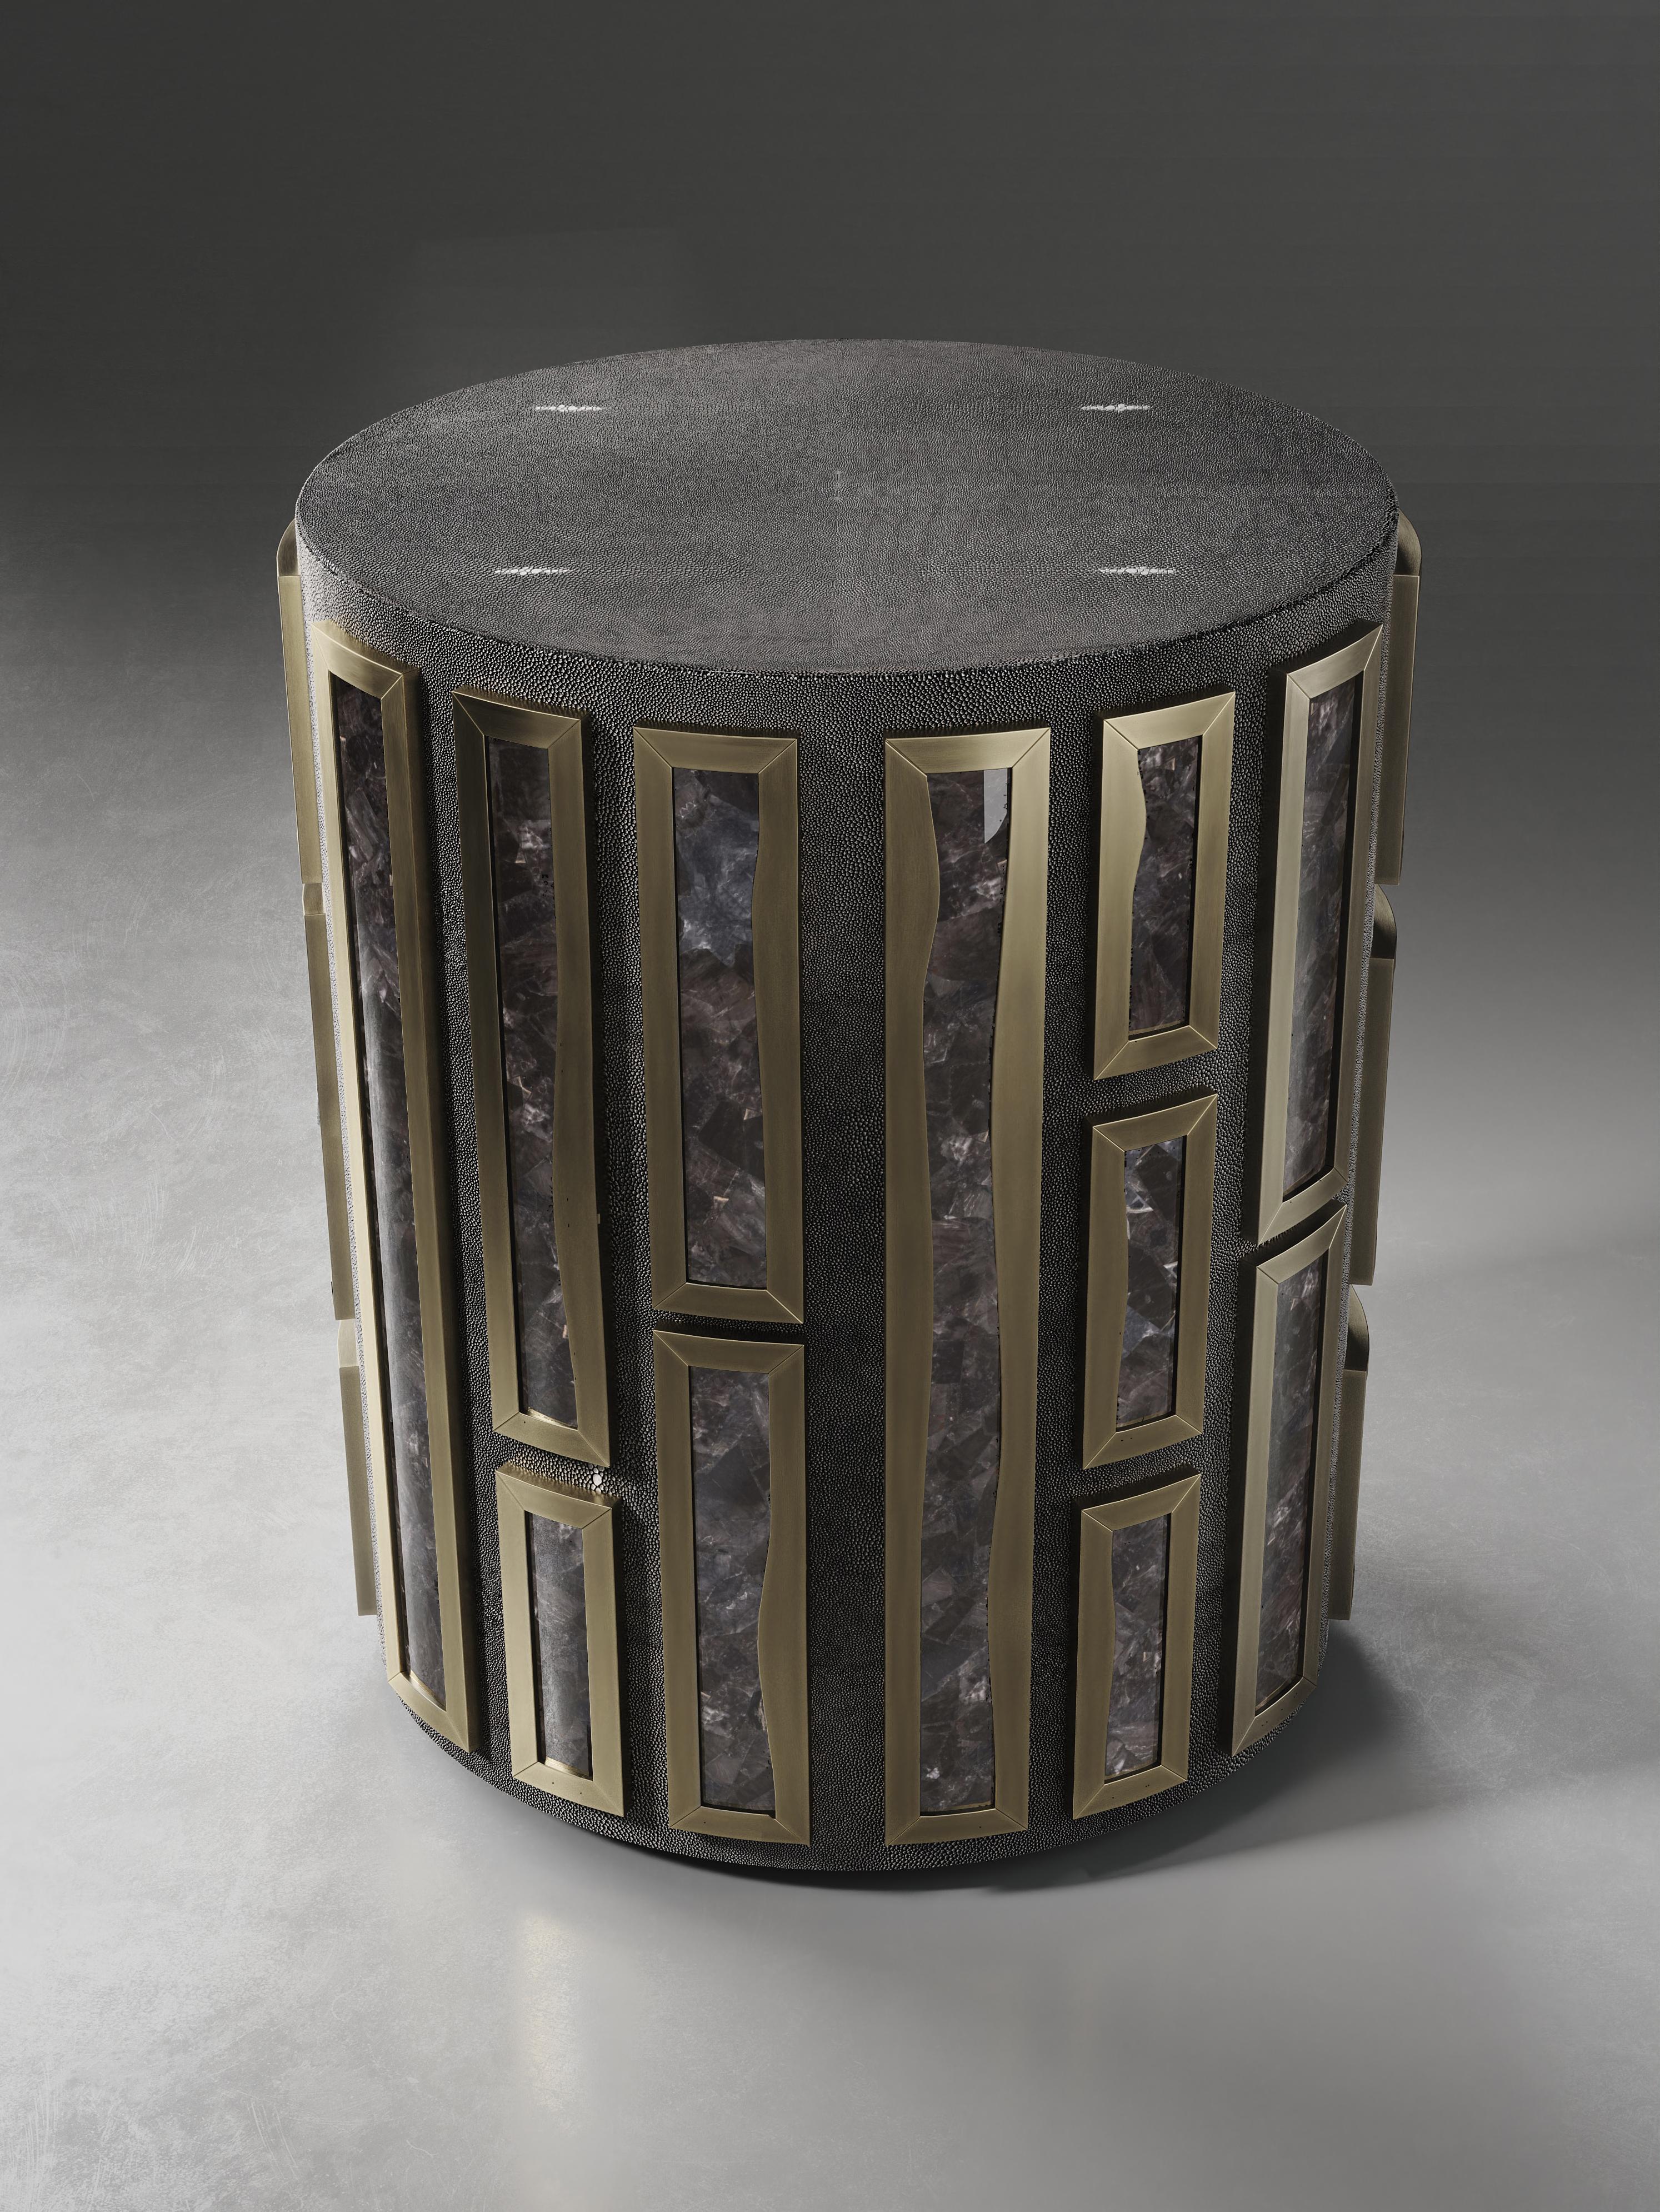 The Talisa side table by R&Y Augousti is originally inspired by the jewelry chest version of it (see images at end of slide). This circular piece is a solid structure inlaid in coal black shagreen and bejewelled with raised intricate black quartz